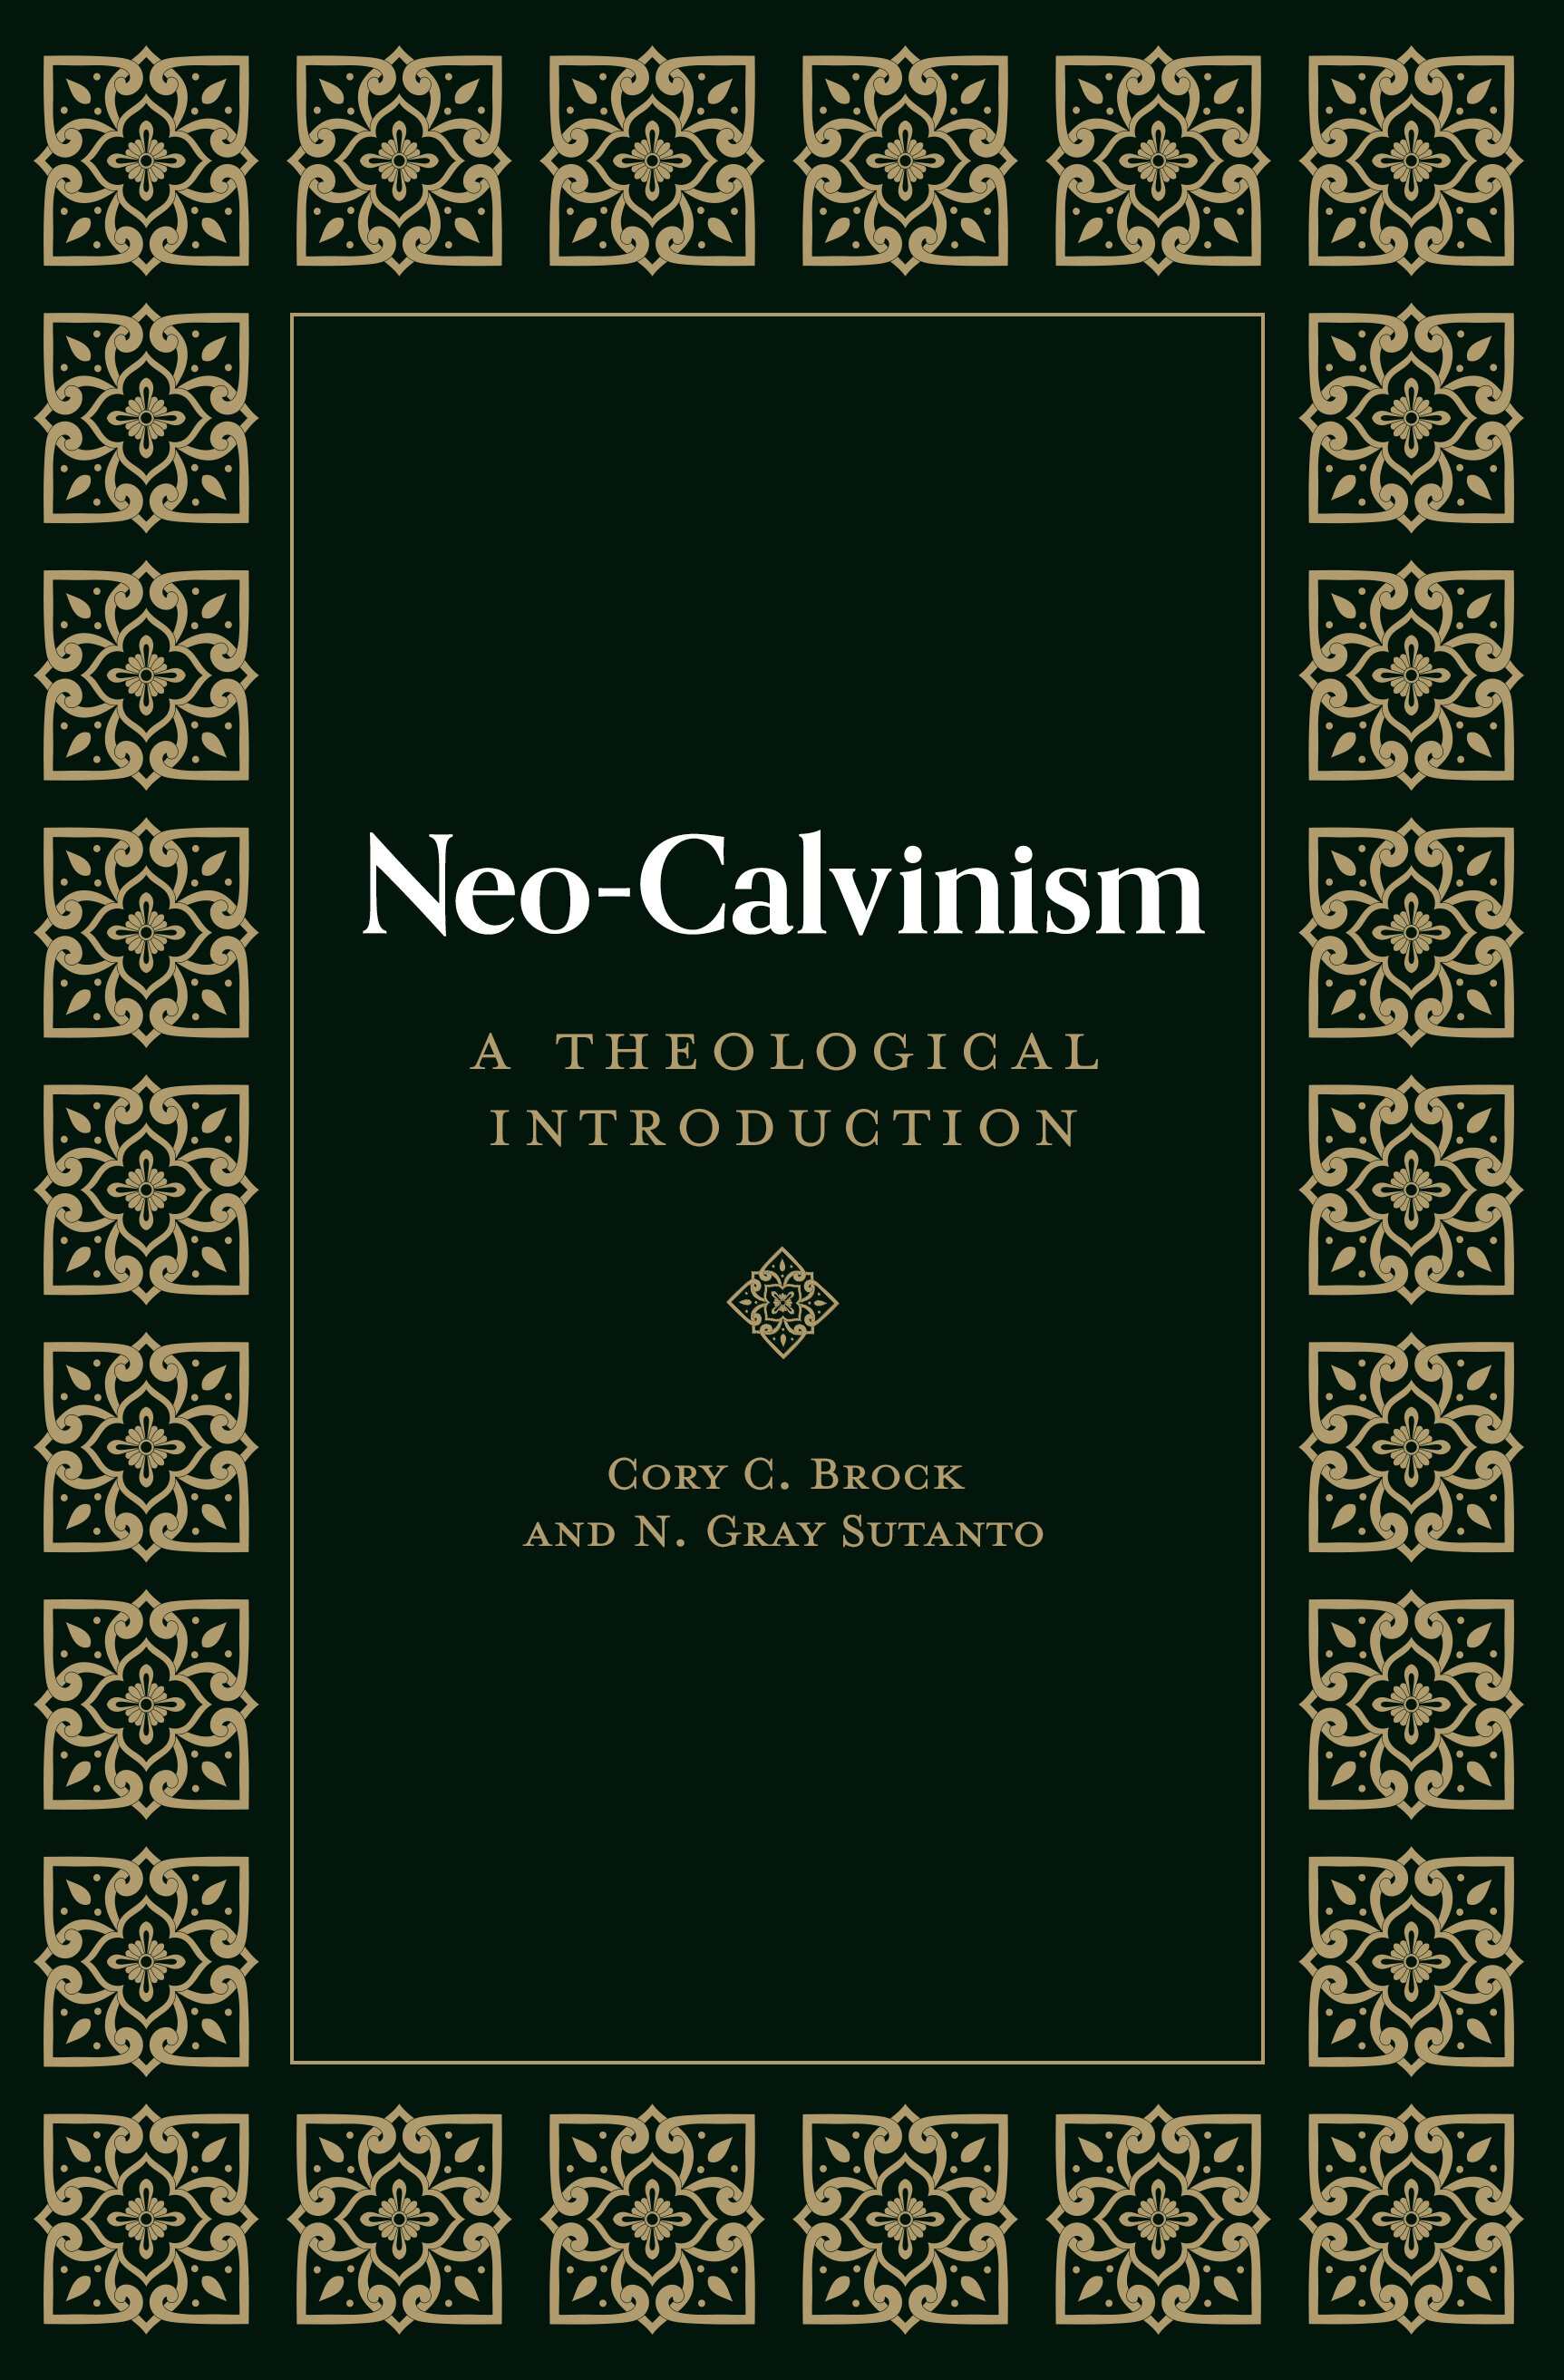 Neo-Calvinism: A Theological Introduction